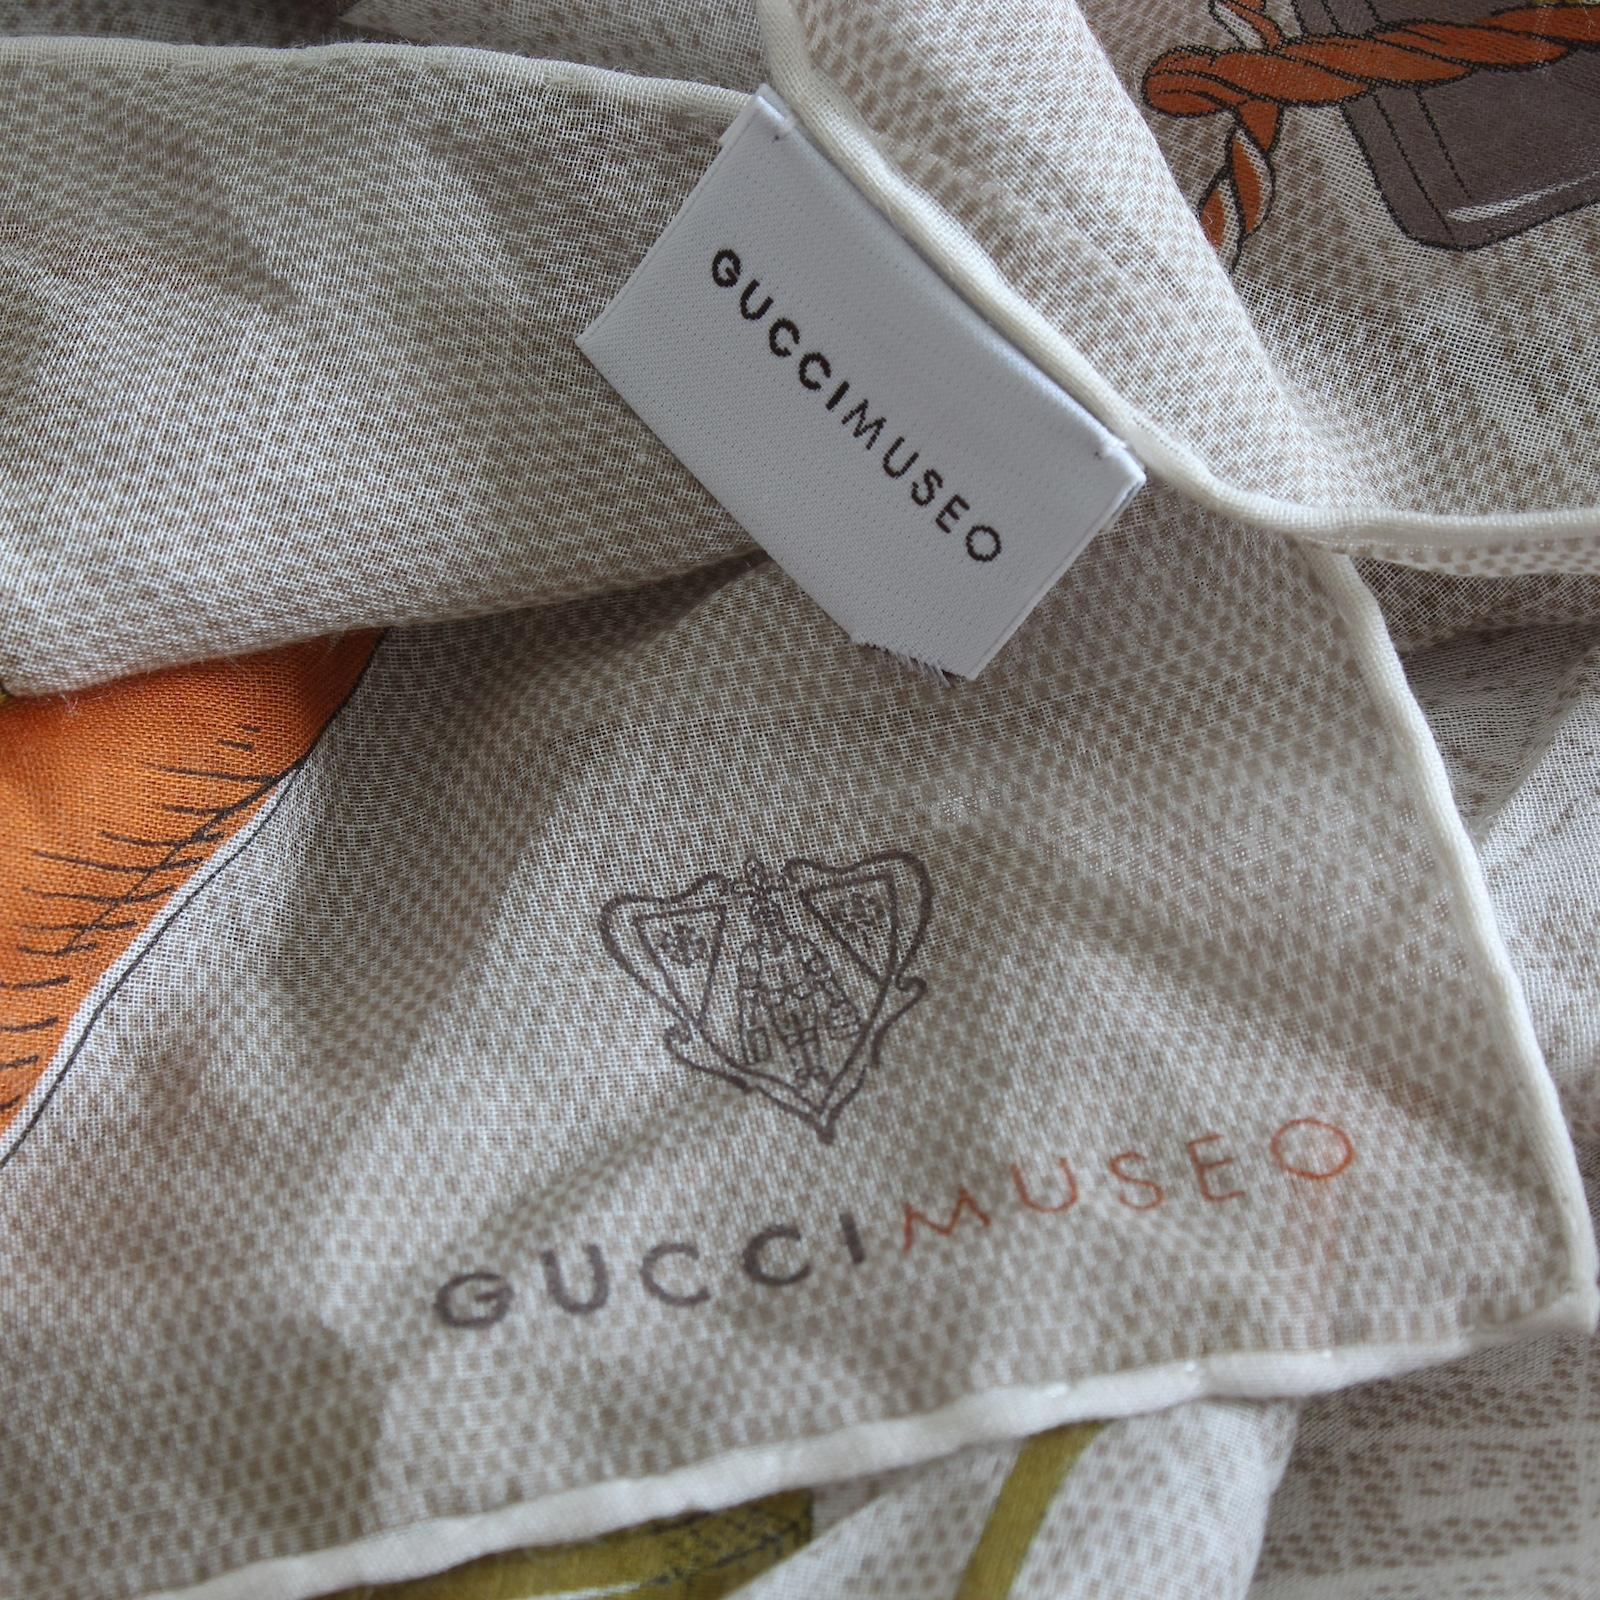 Gucci Beige Brown Cotton Scarf Limited Edition 2011 For Sale 2